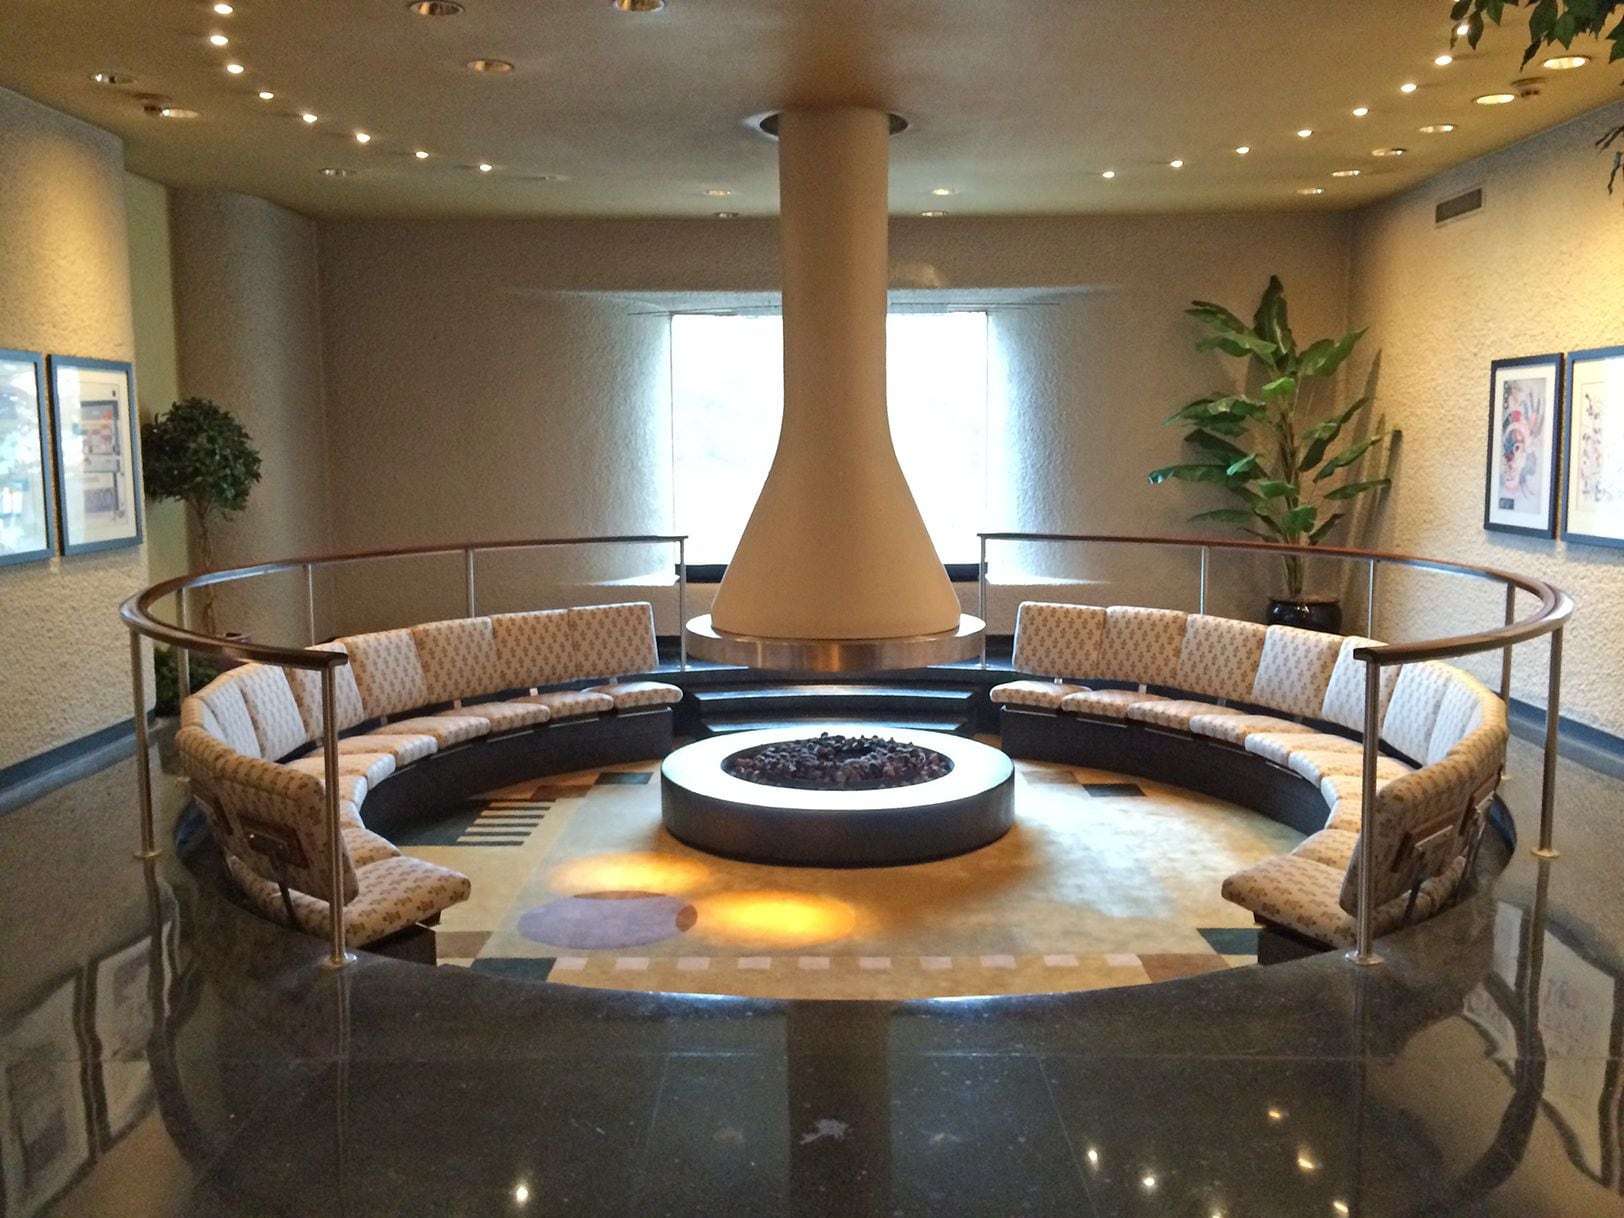 Conversation pit of the former  Braniff Hostess College.